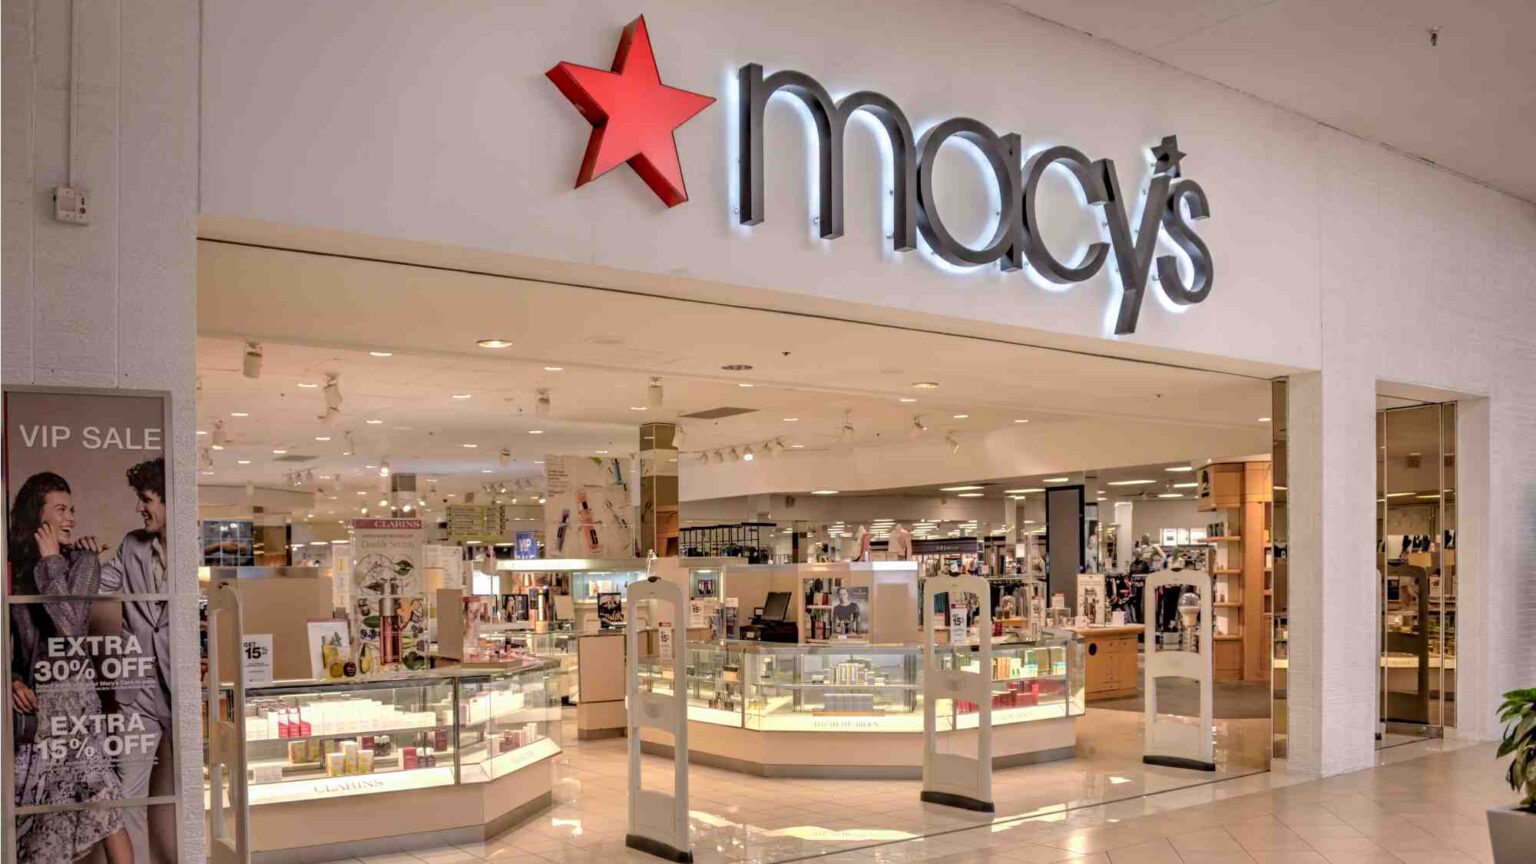 Caught in a retail limbo? Discover why "A Bold New Chapter" isn’t an adieu but a thrilling twist in the Macy's shutdown saga. It's corporate survival of the swankiest!